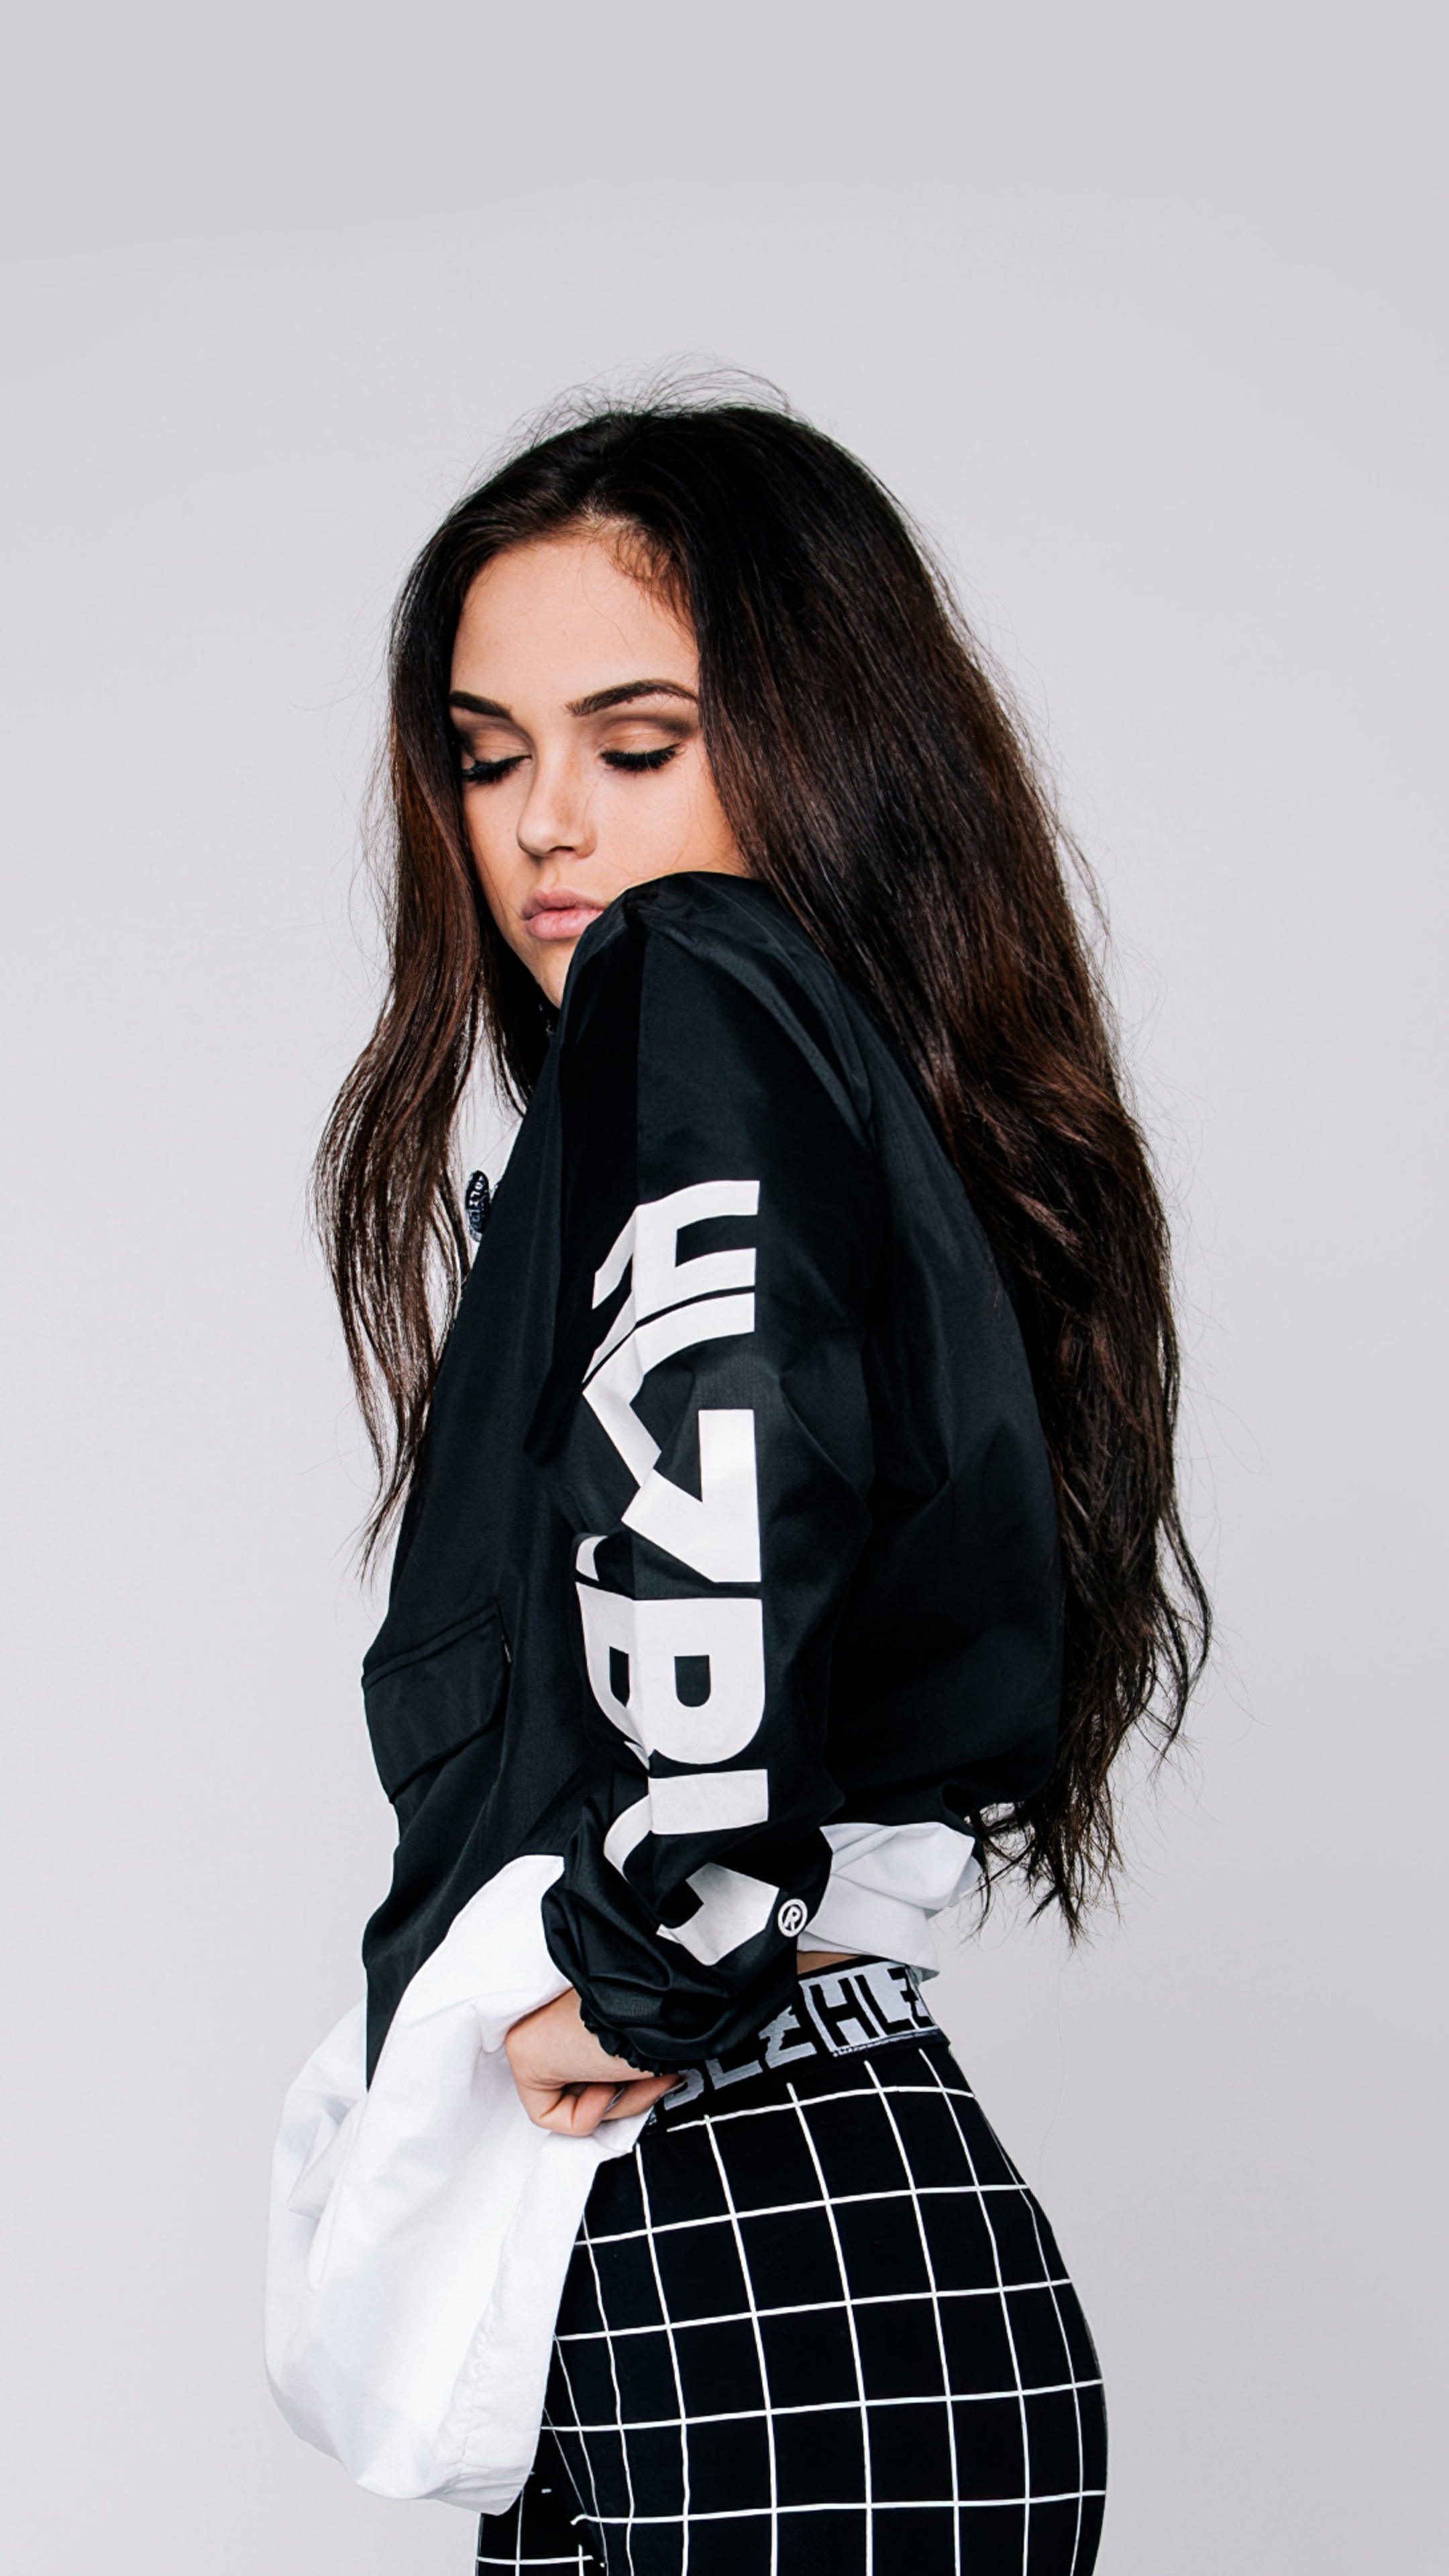 Maggie Lindemann 2020 Sony Xperia X, XZ, Z5 Premium HD 4k Wallpapers, Images, Backgrounds, Photos and Pictures 2160x3840